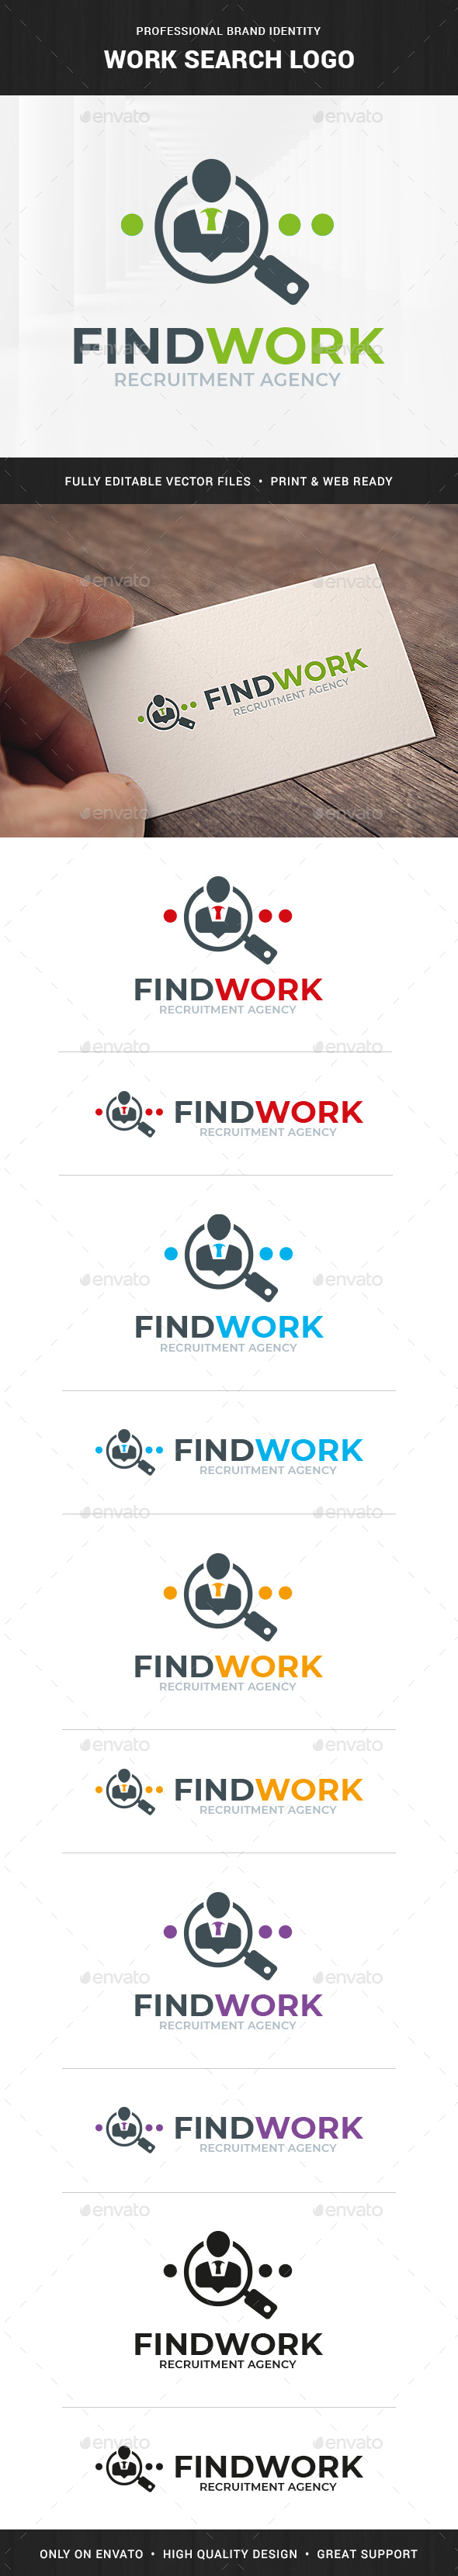 Work Search Logo Template